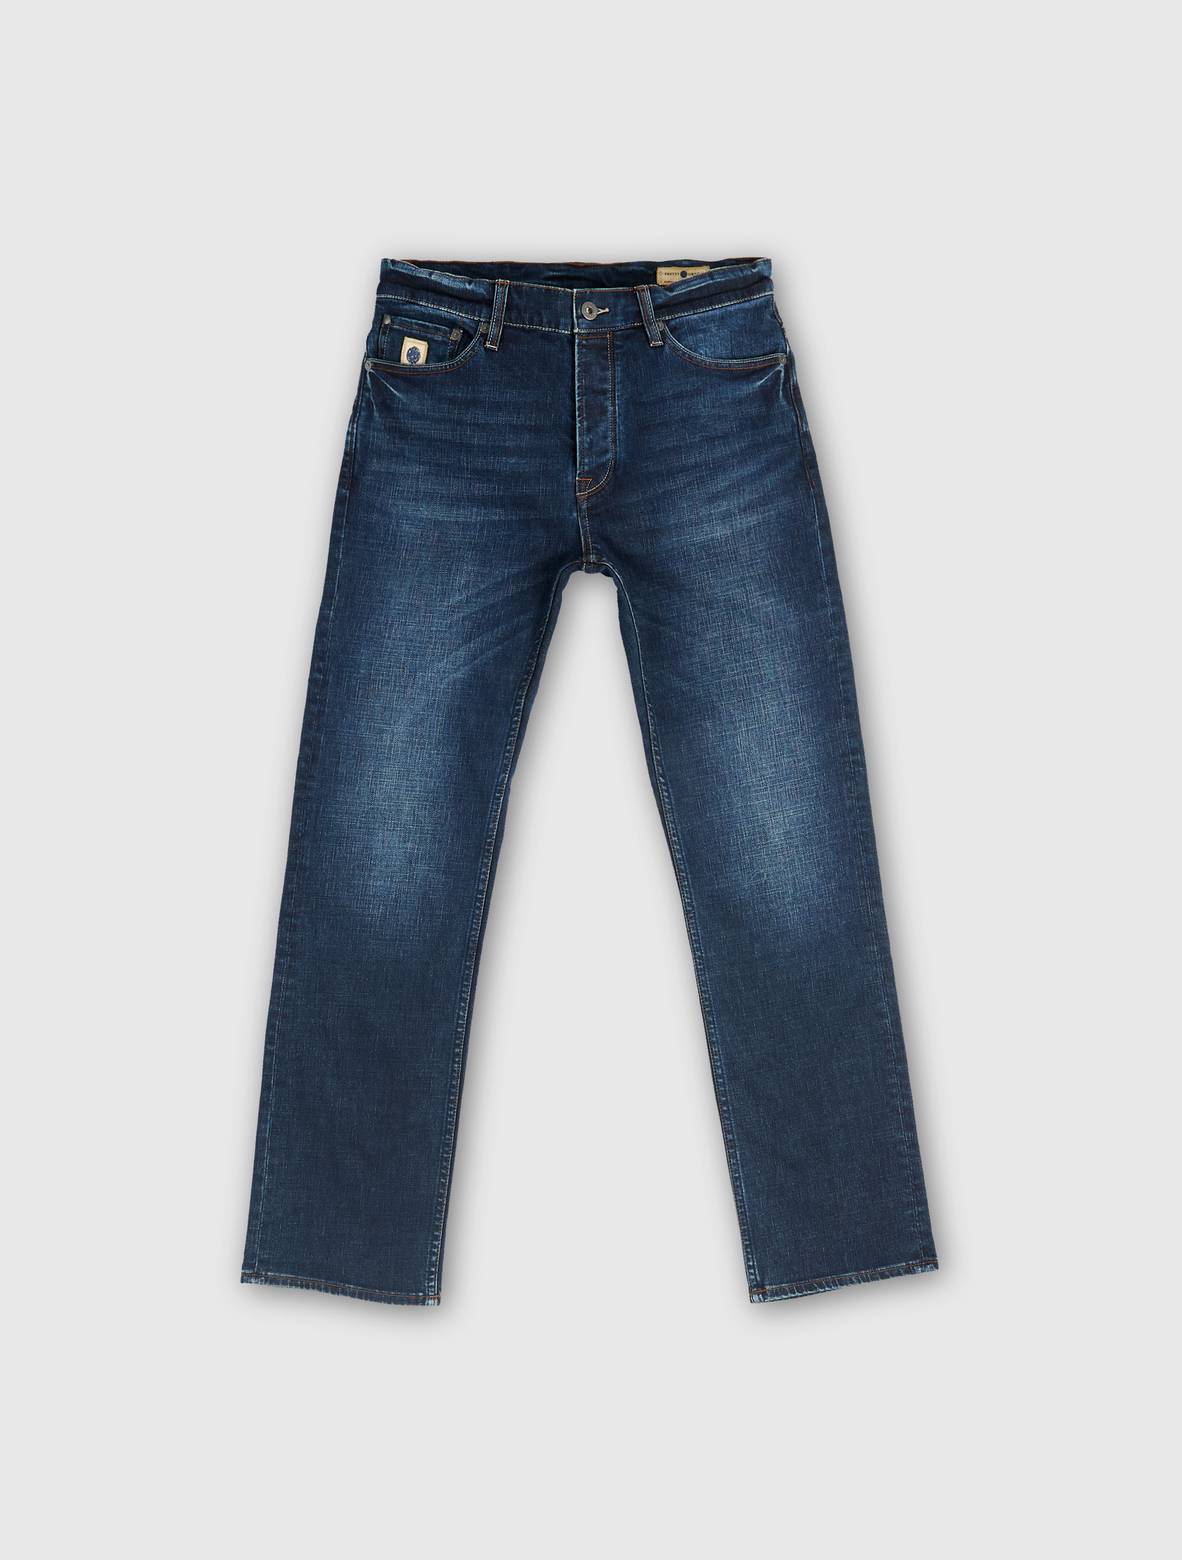 Erwood Slim Fit Jeans | Pretty Green | Men's Clothing and Accessories.